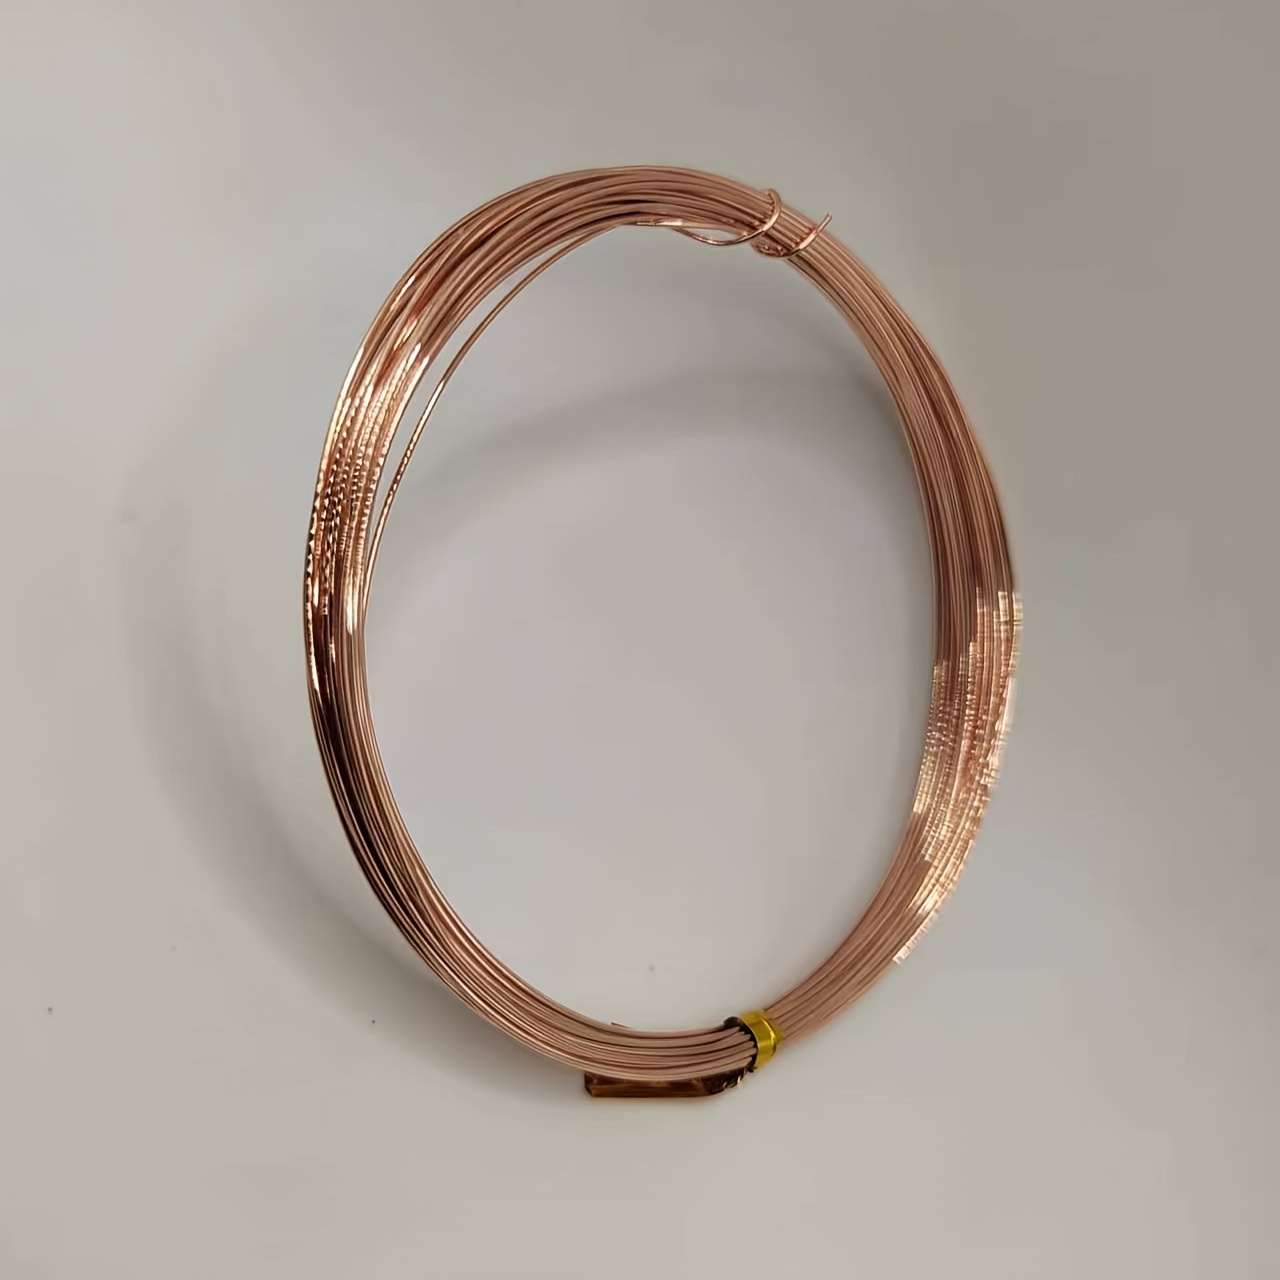 22 Gauge Bare Copper Wire 0.7mm Pure Copper Wire Soft Wire 32 Feet (One  Roll) 10 Meters Length Solid Bare Copper Wire Round